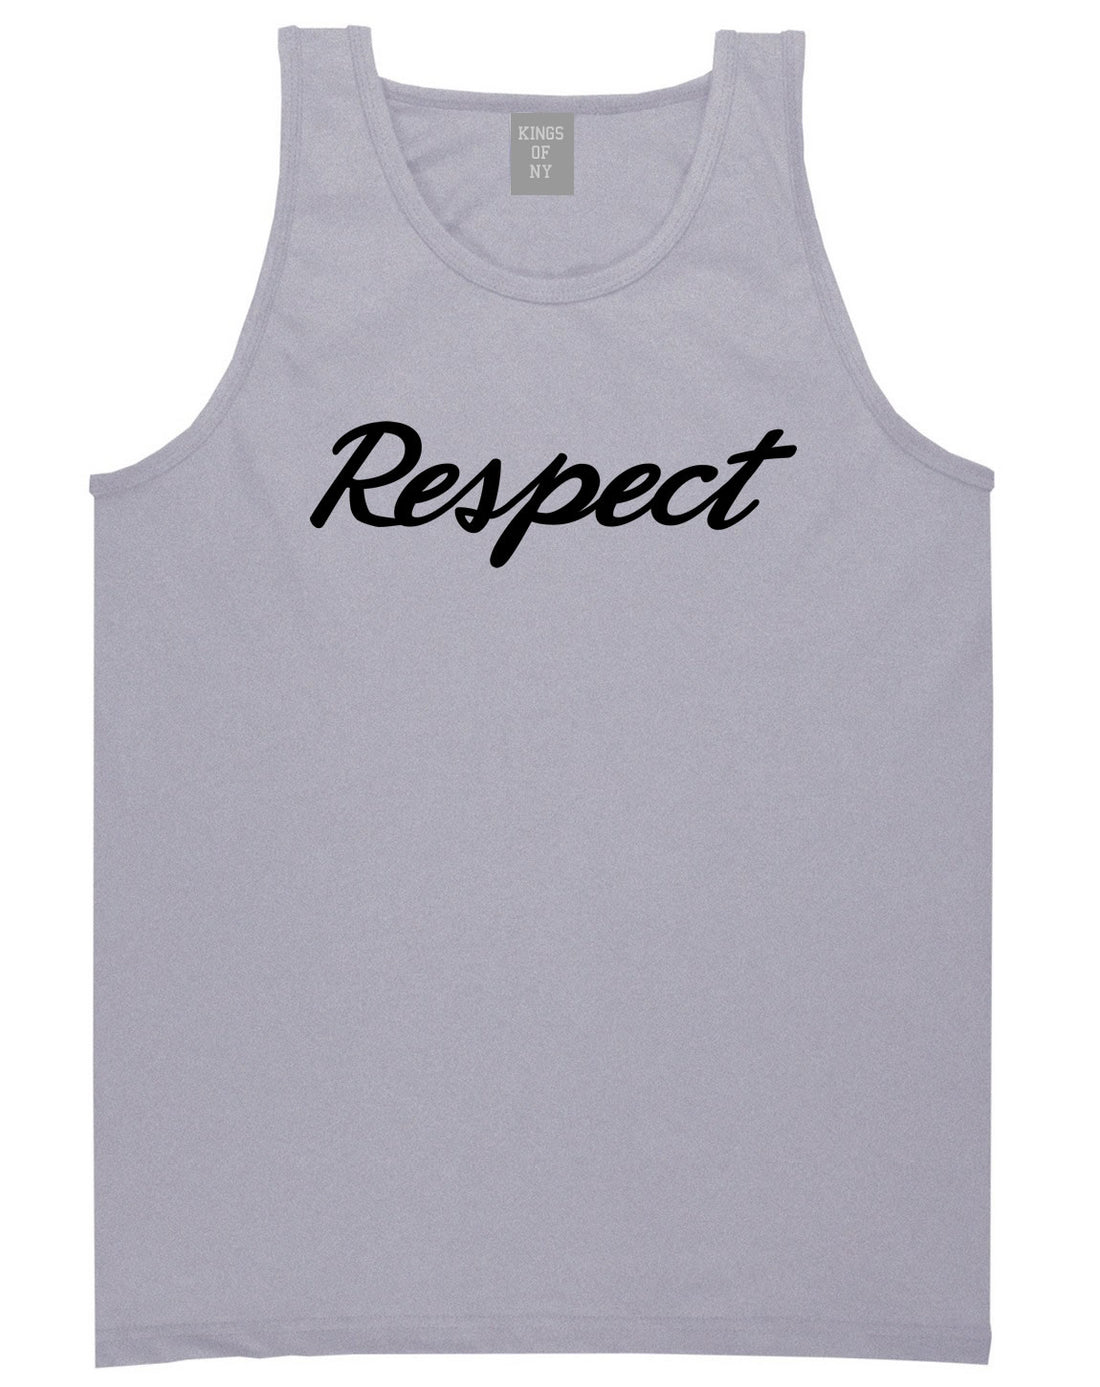 Kings Of NY Respect Tank Top in Grey